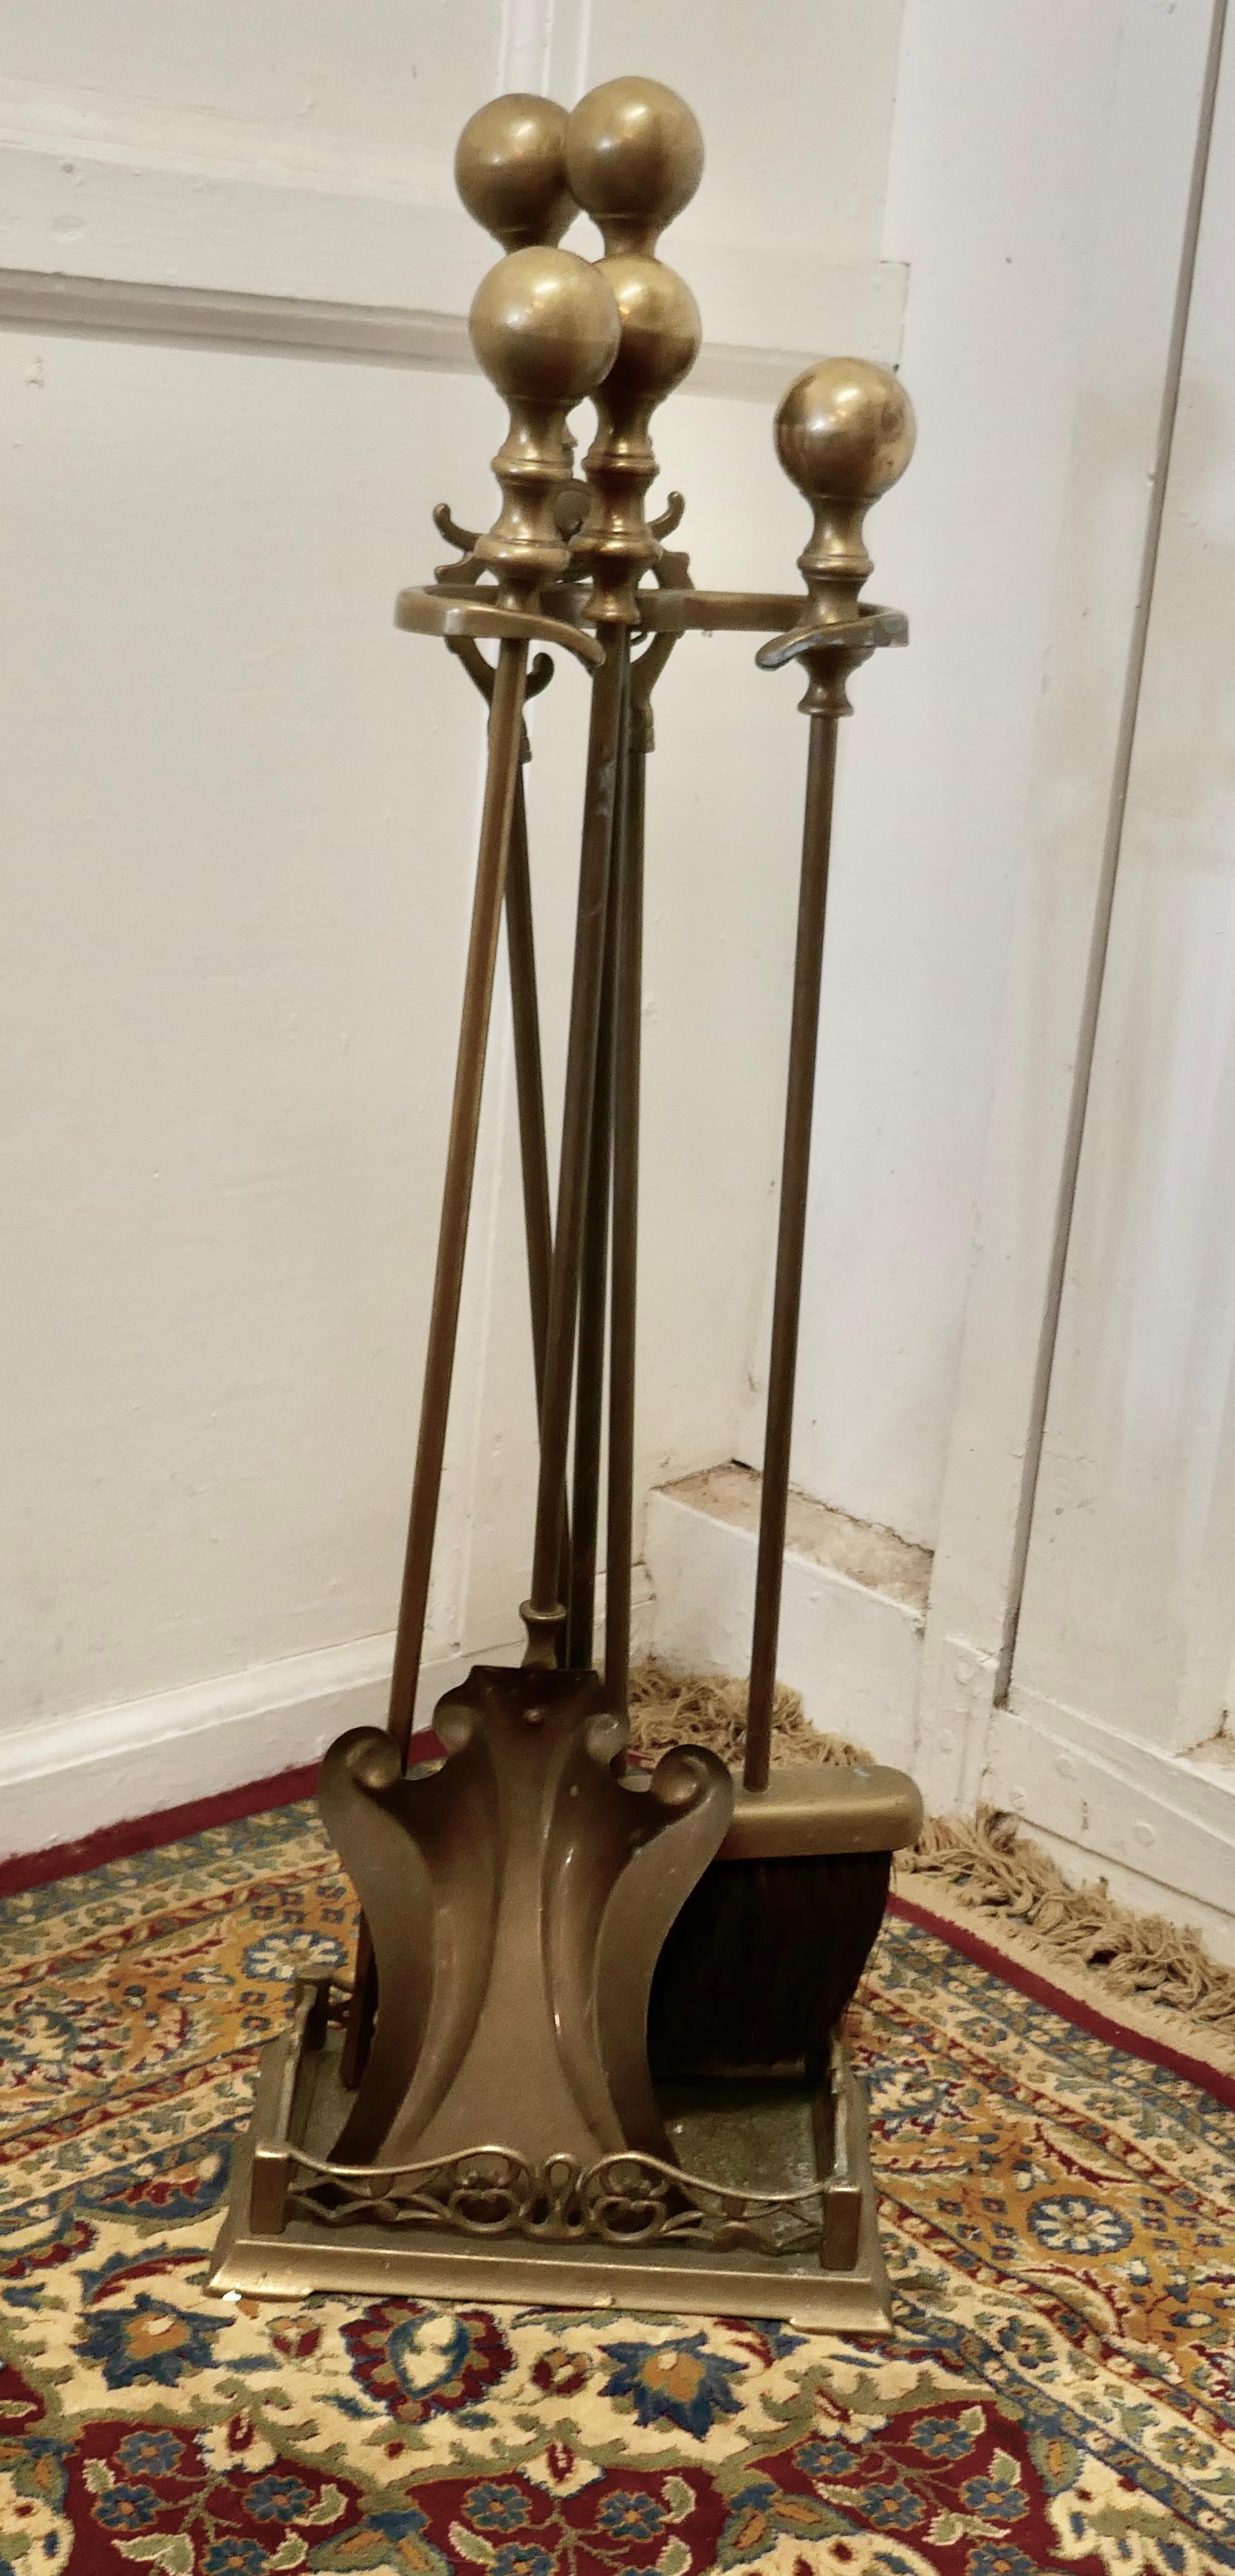 Attractive Brass Fireside Companion Set, Fireside Tools

This is a long handled set on its own stand, shovel, tongs and poker 
The stand 30” tall, 11” wide and 7” deep
AC69.